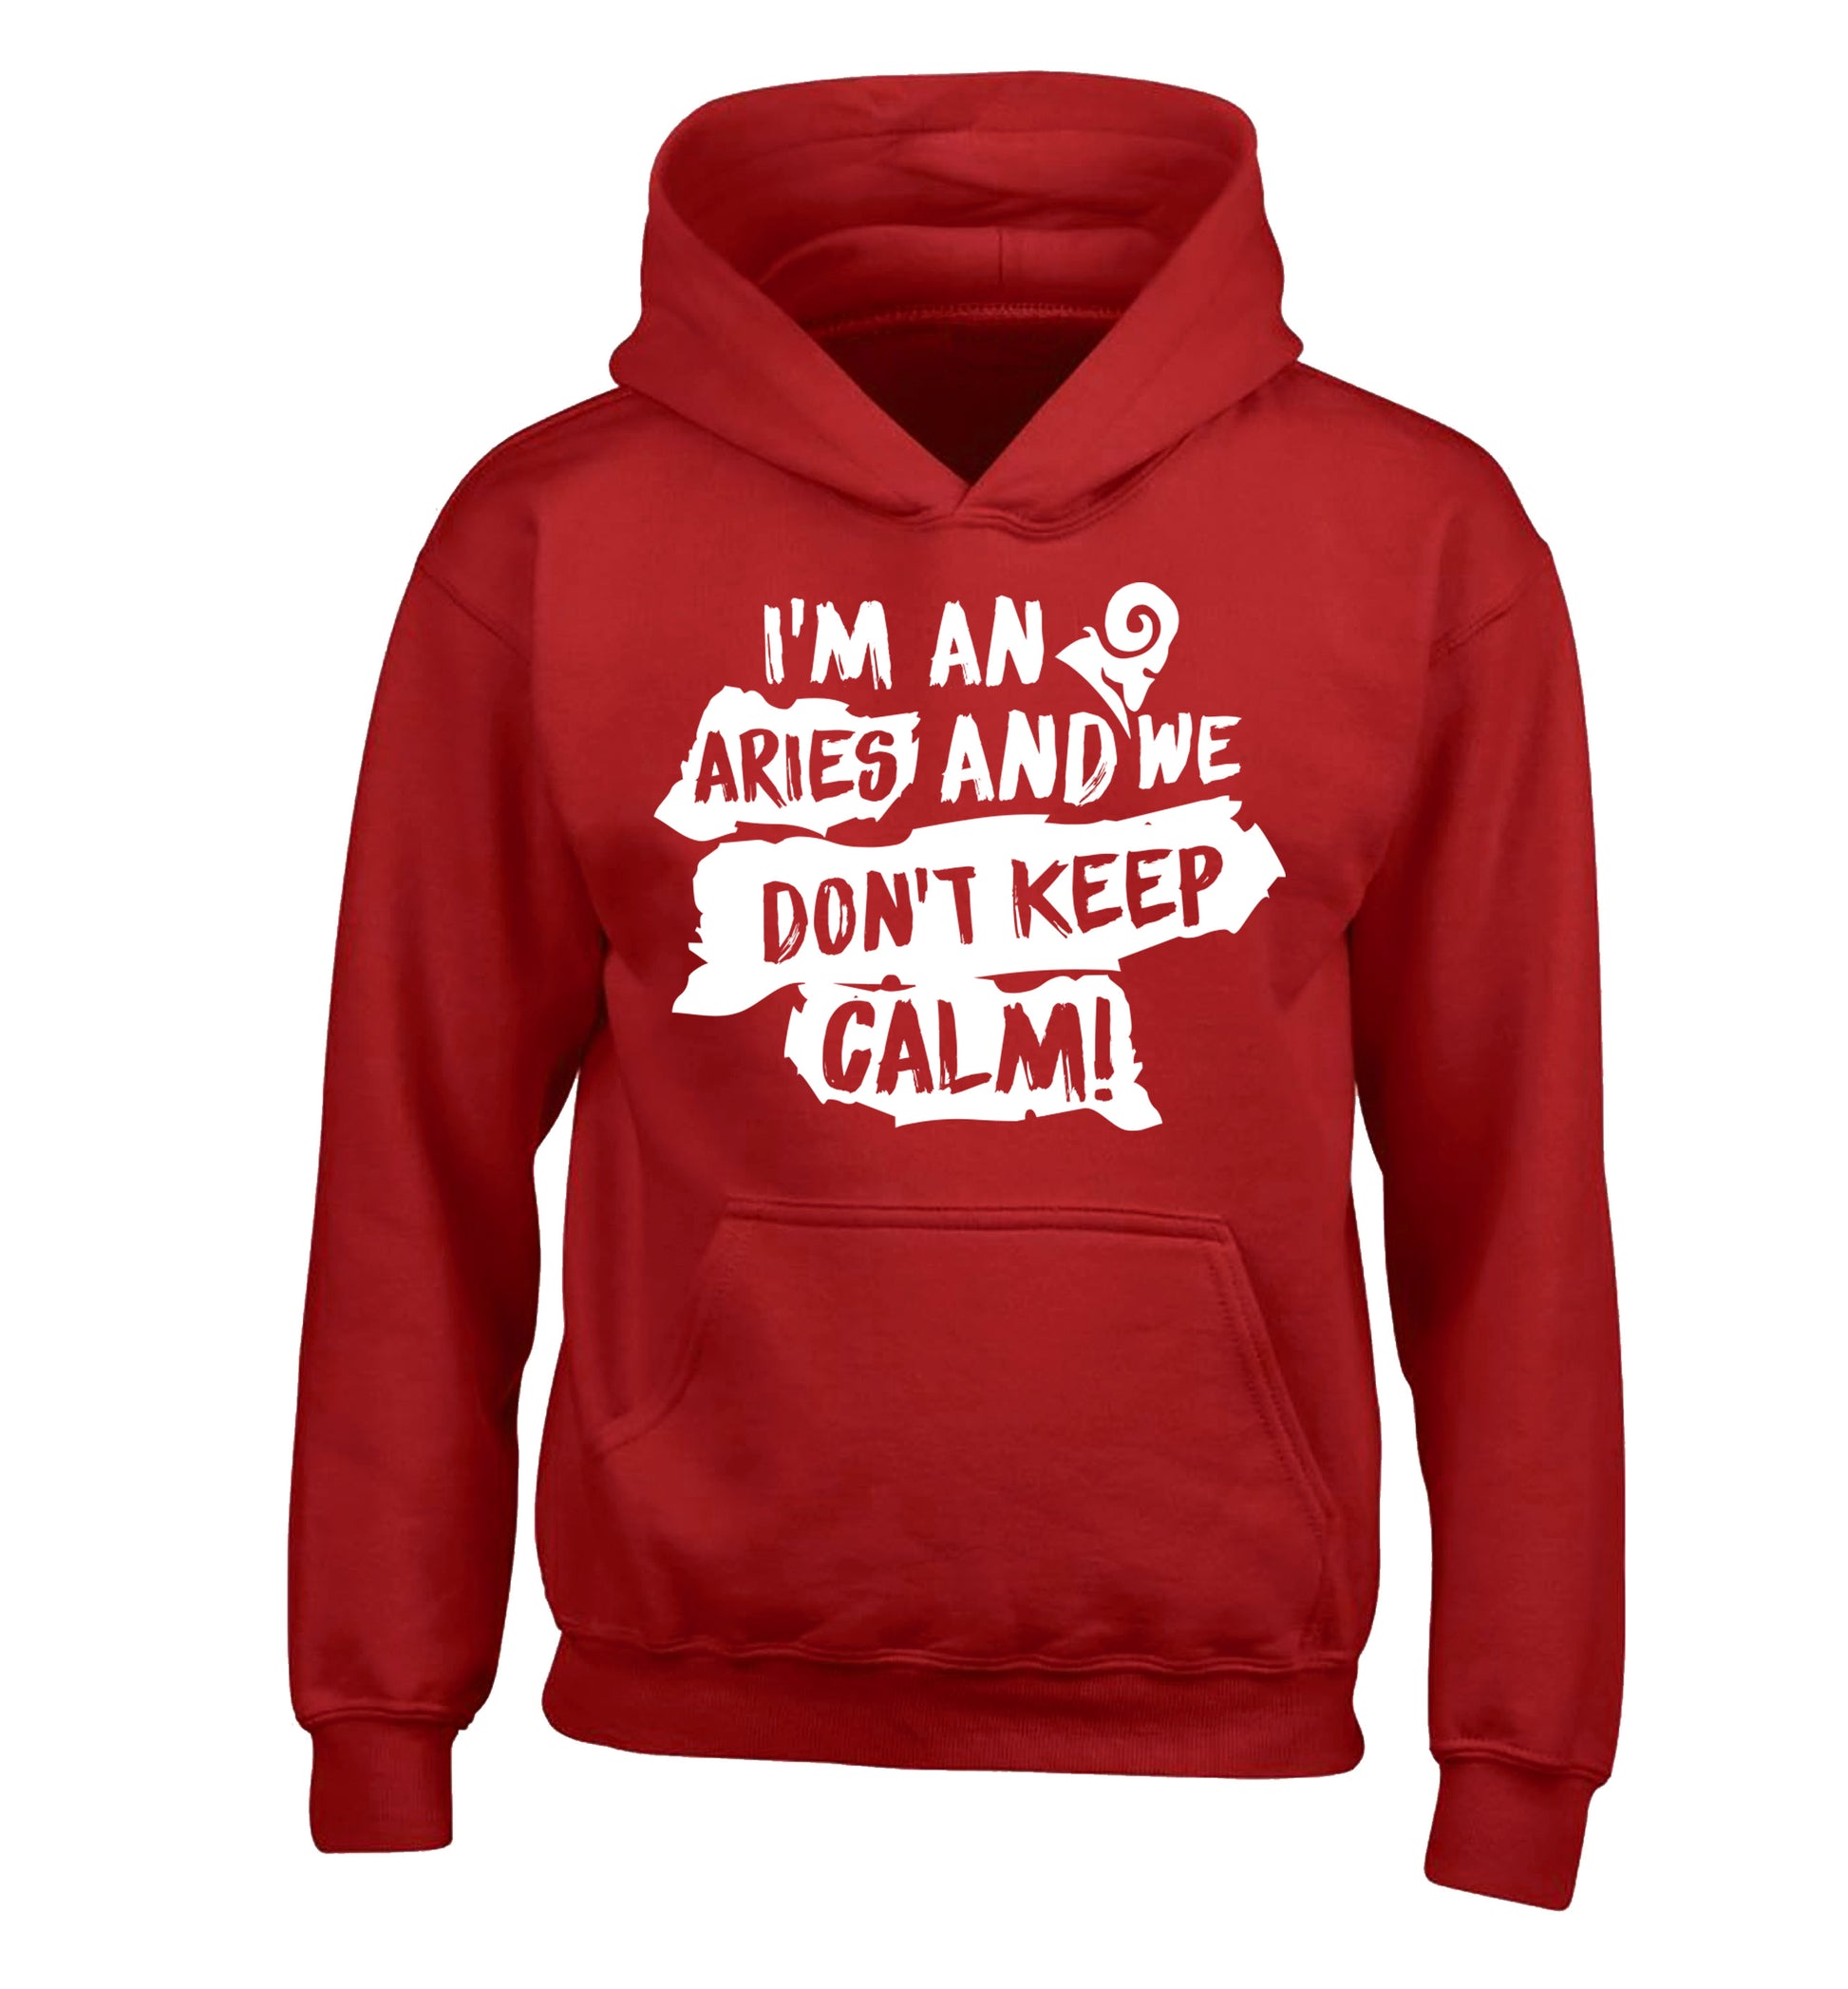 I'm an aries and we don't keep calm children's red hoodie 12-13 Years